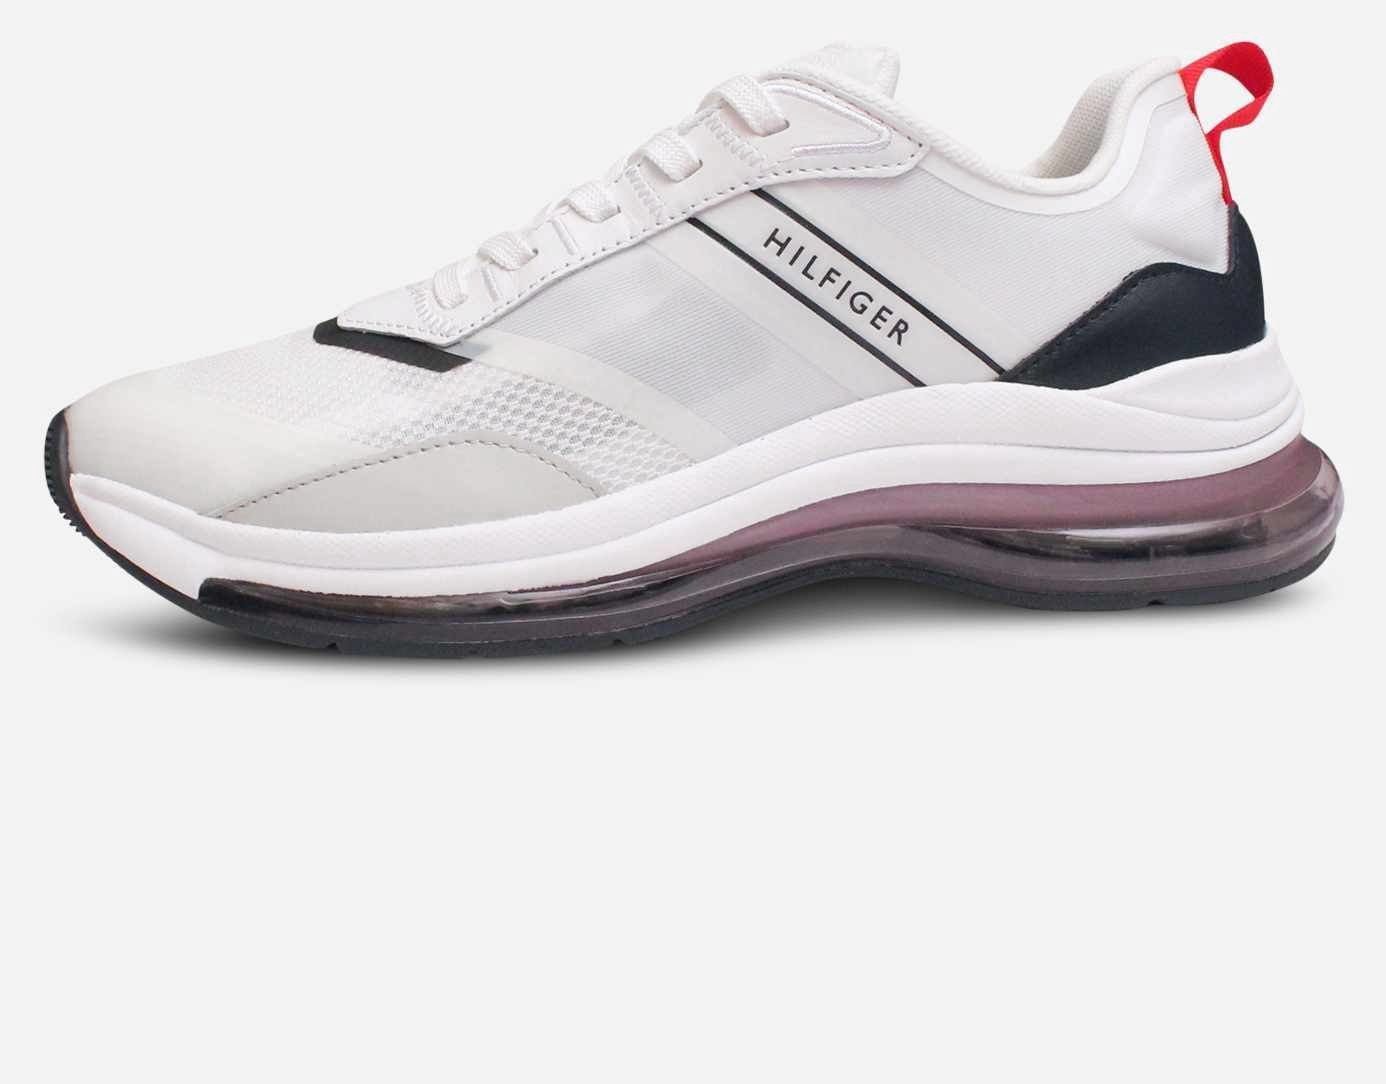 Gewaad Westers Mortal Tommy Hilfiger Air Runner Sports Shoes in White